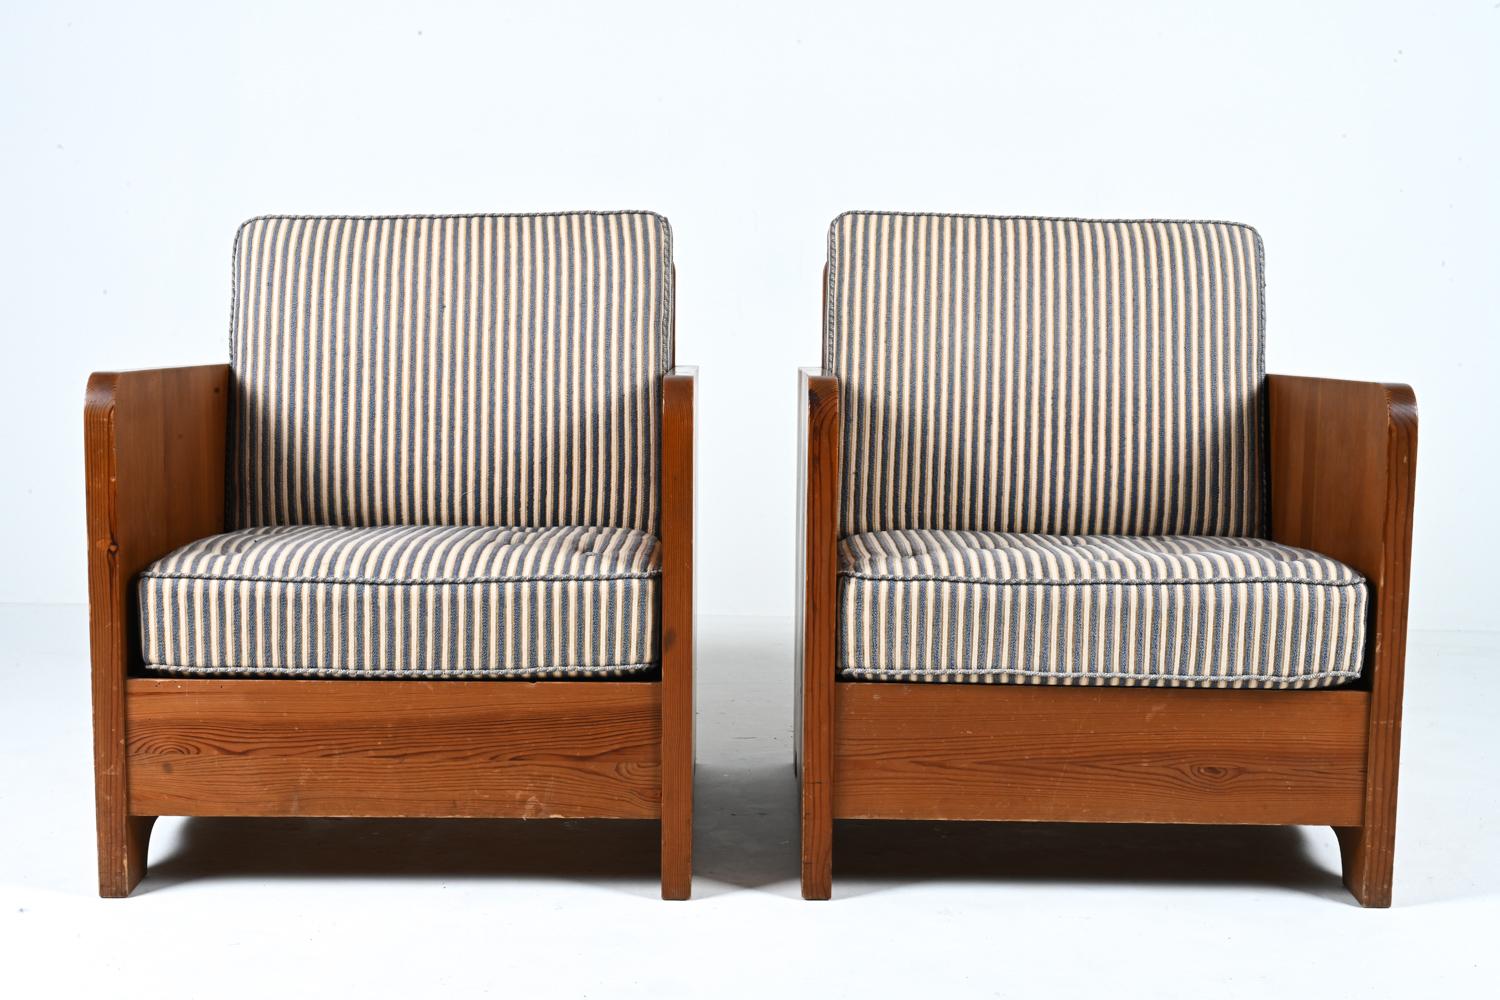 Pair of Scandinavian Pine Easy Chairs Attributed to Axel Einar Hjorth In Good Condition For Sale In Norwalk, CT